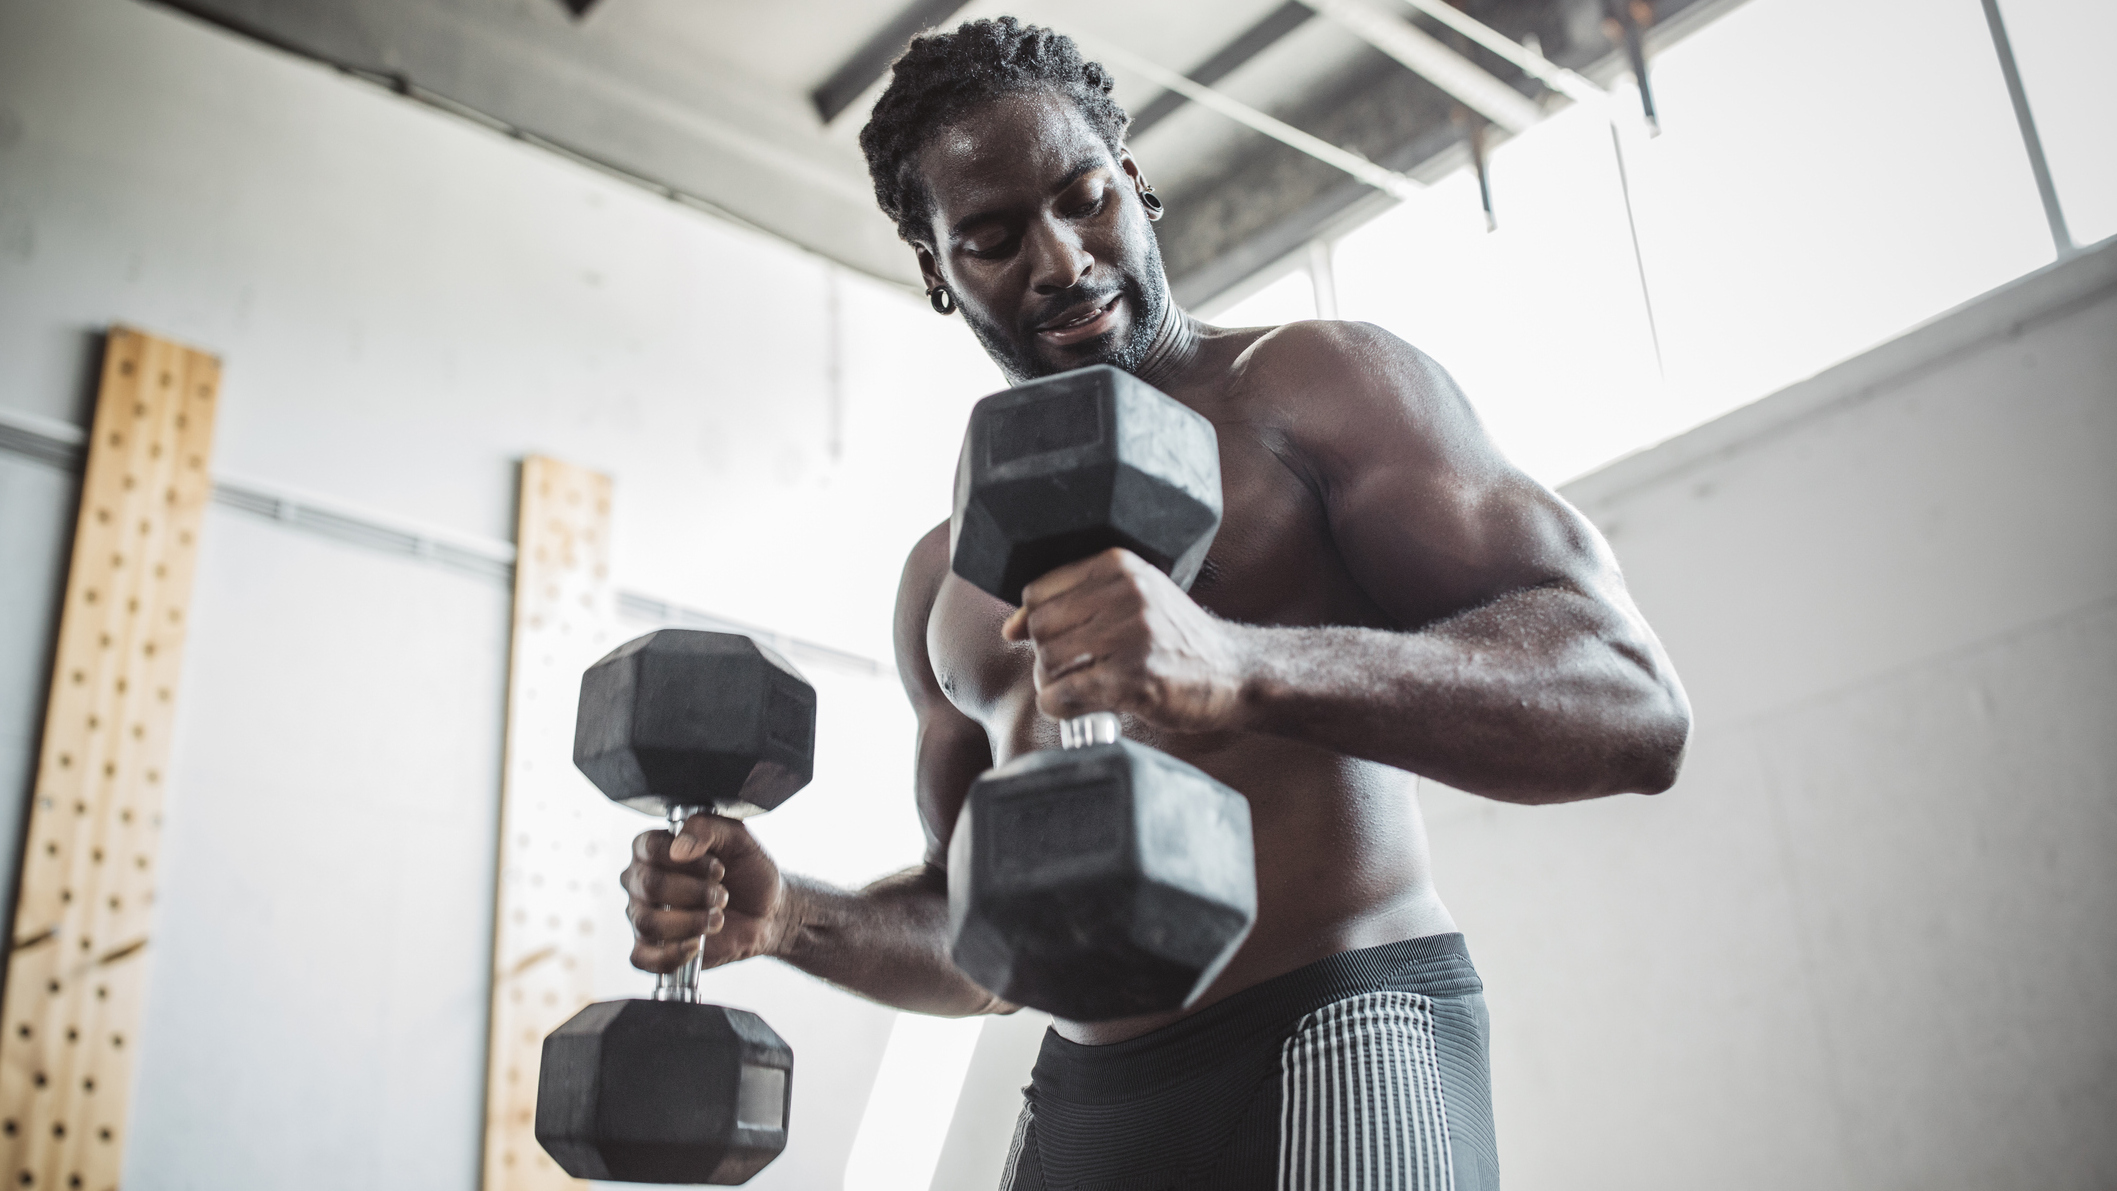 I'm a PT — you just need this 3-move biceps workout with dumbbells